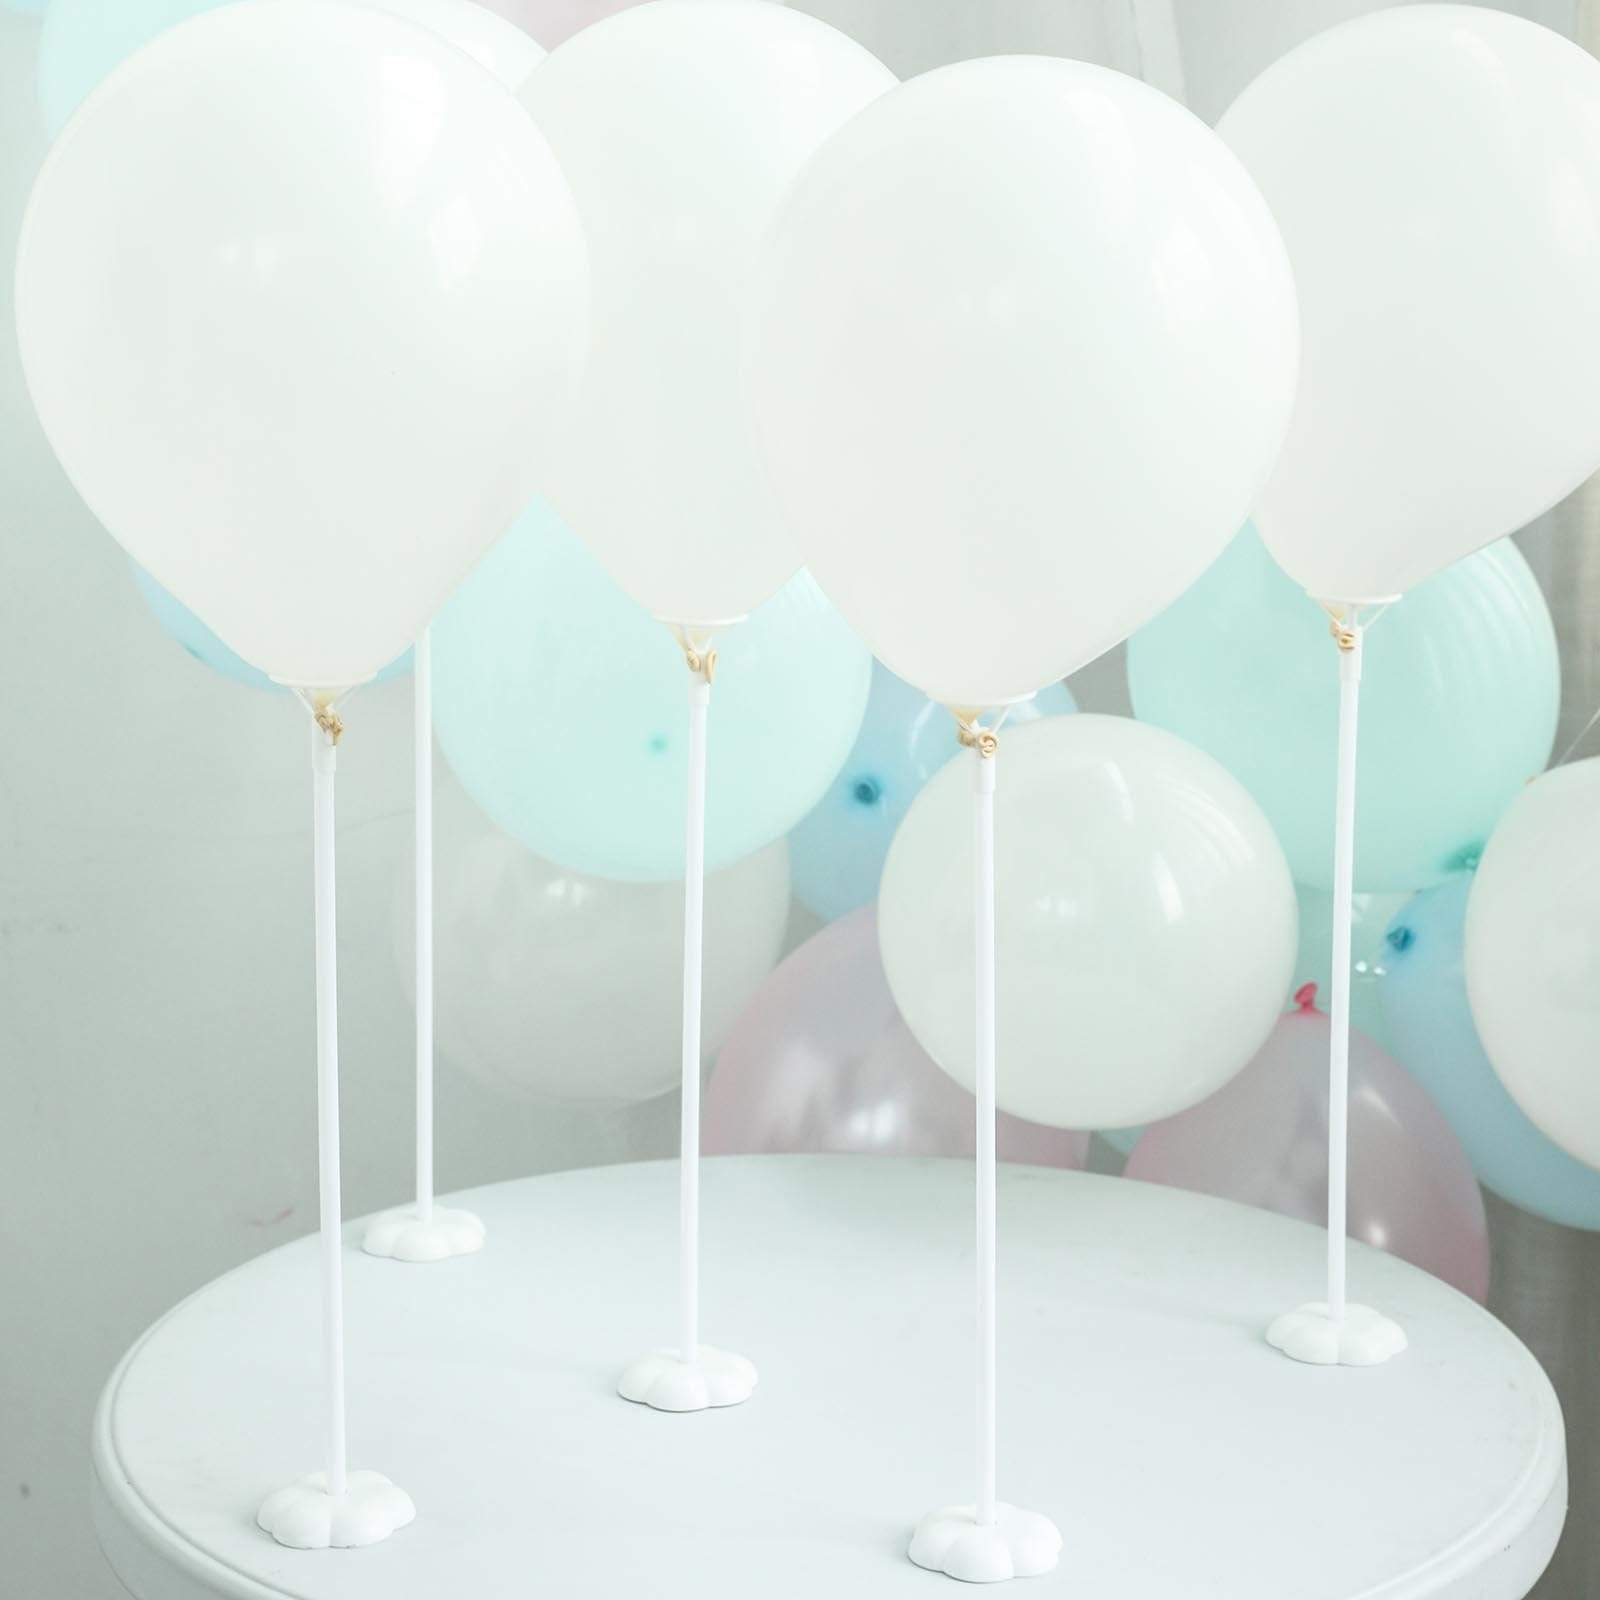 5 White 17 in tall Balloons Column Stand Sticks Holders